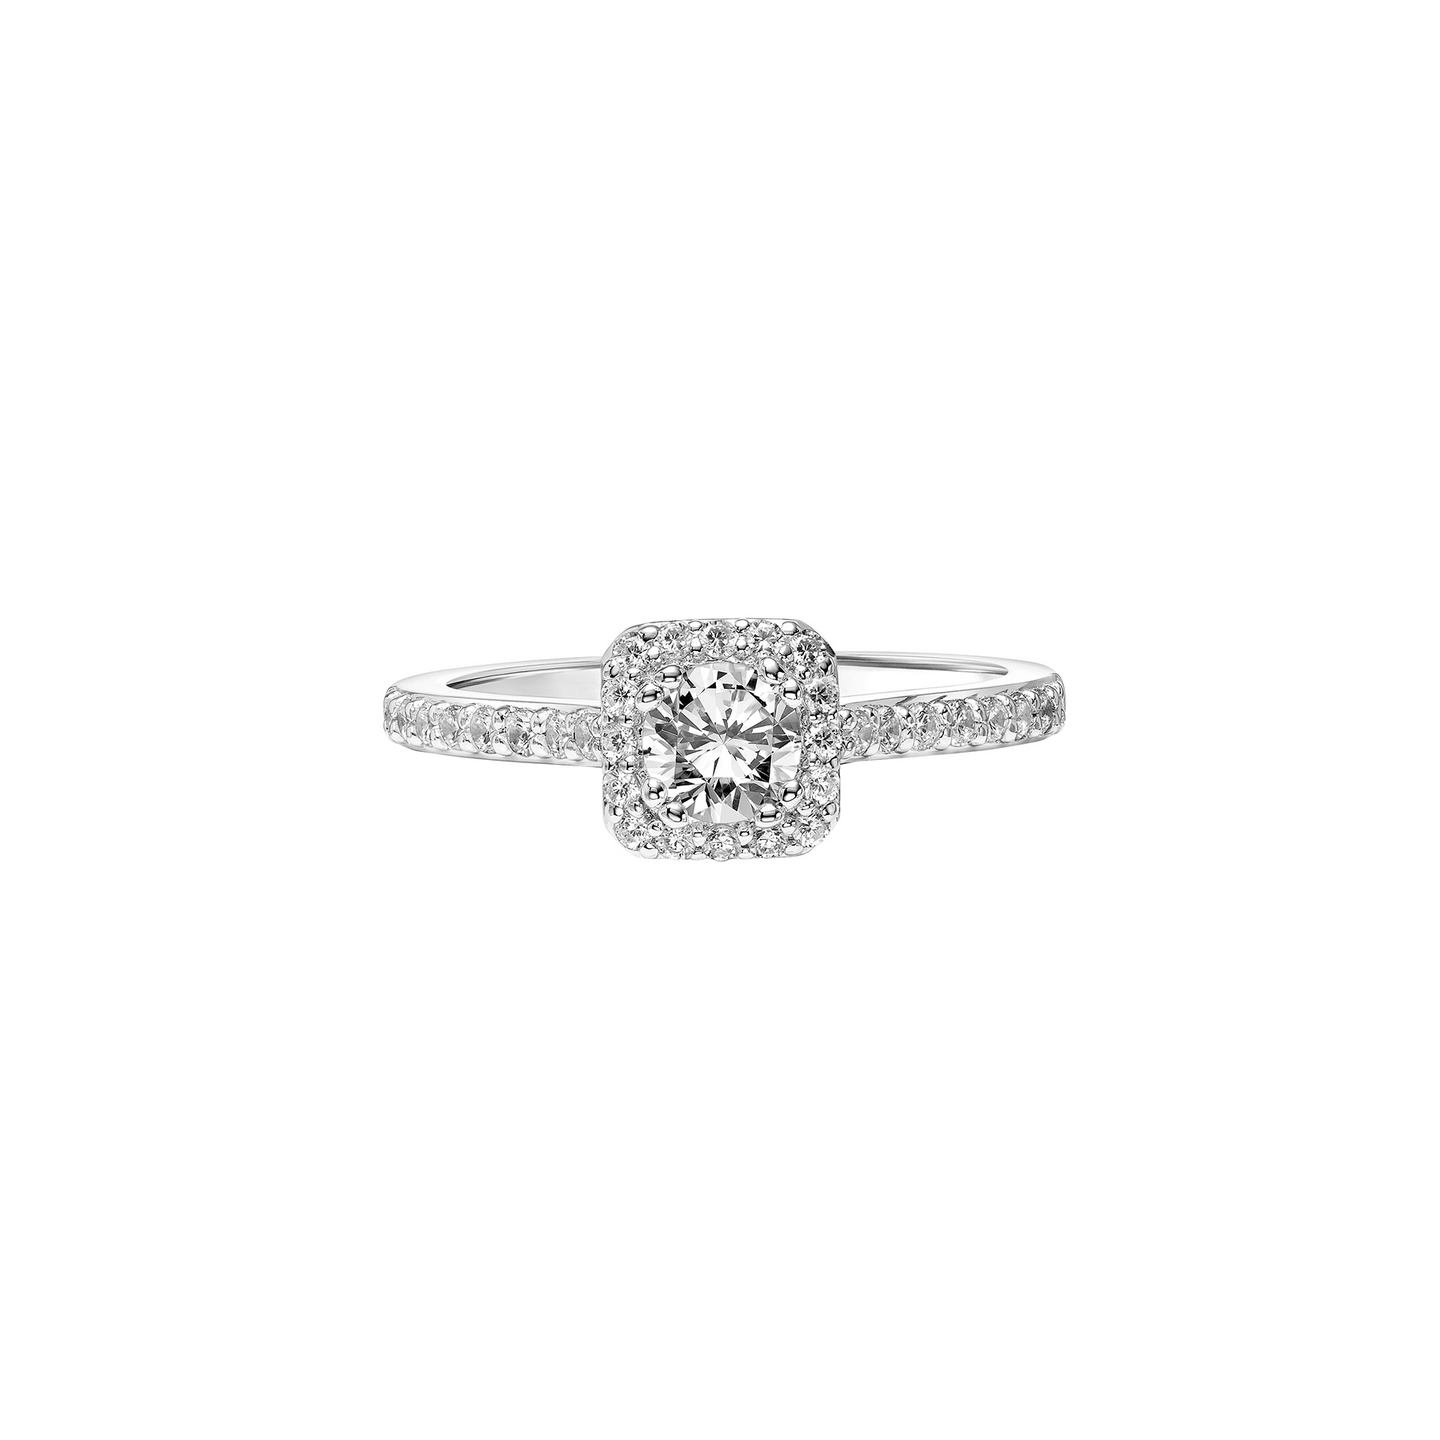 Fink's Exclusive 14K White Gold Round Diamond Halo Engagement Ring with Diamond Shank Accent